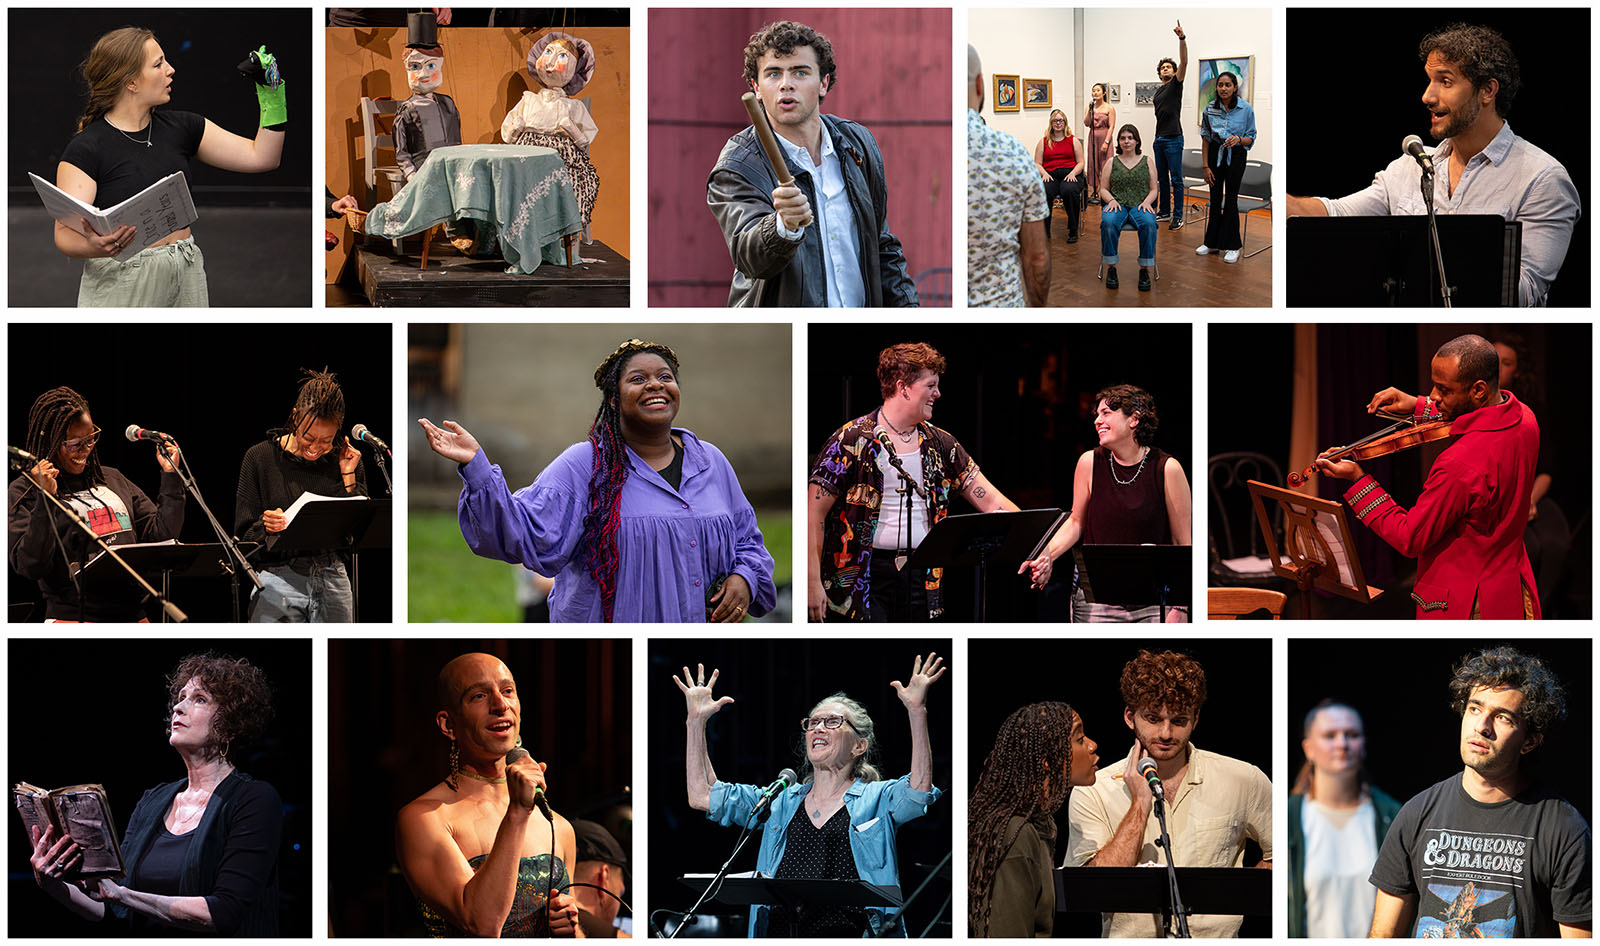 A grid of fourteen photos, depicting people performing in various environments as part of theatrical productions.